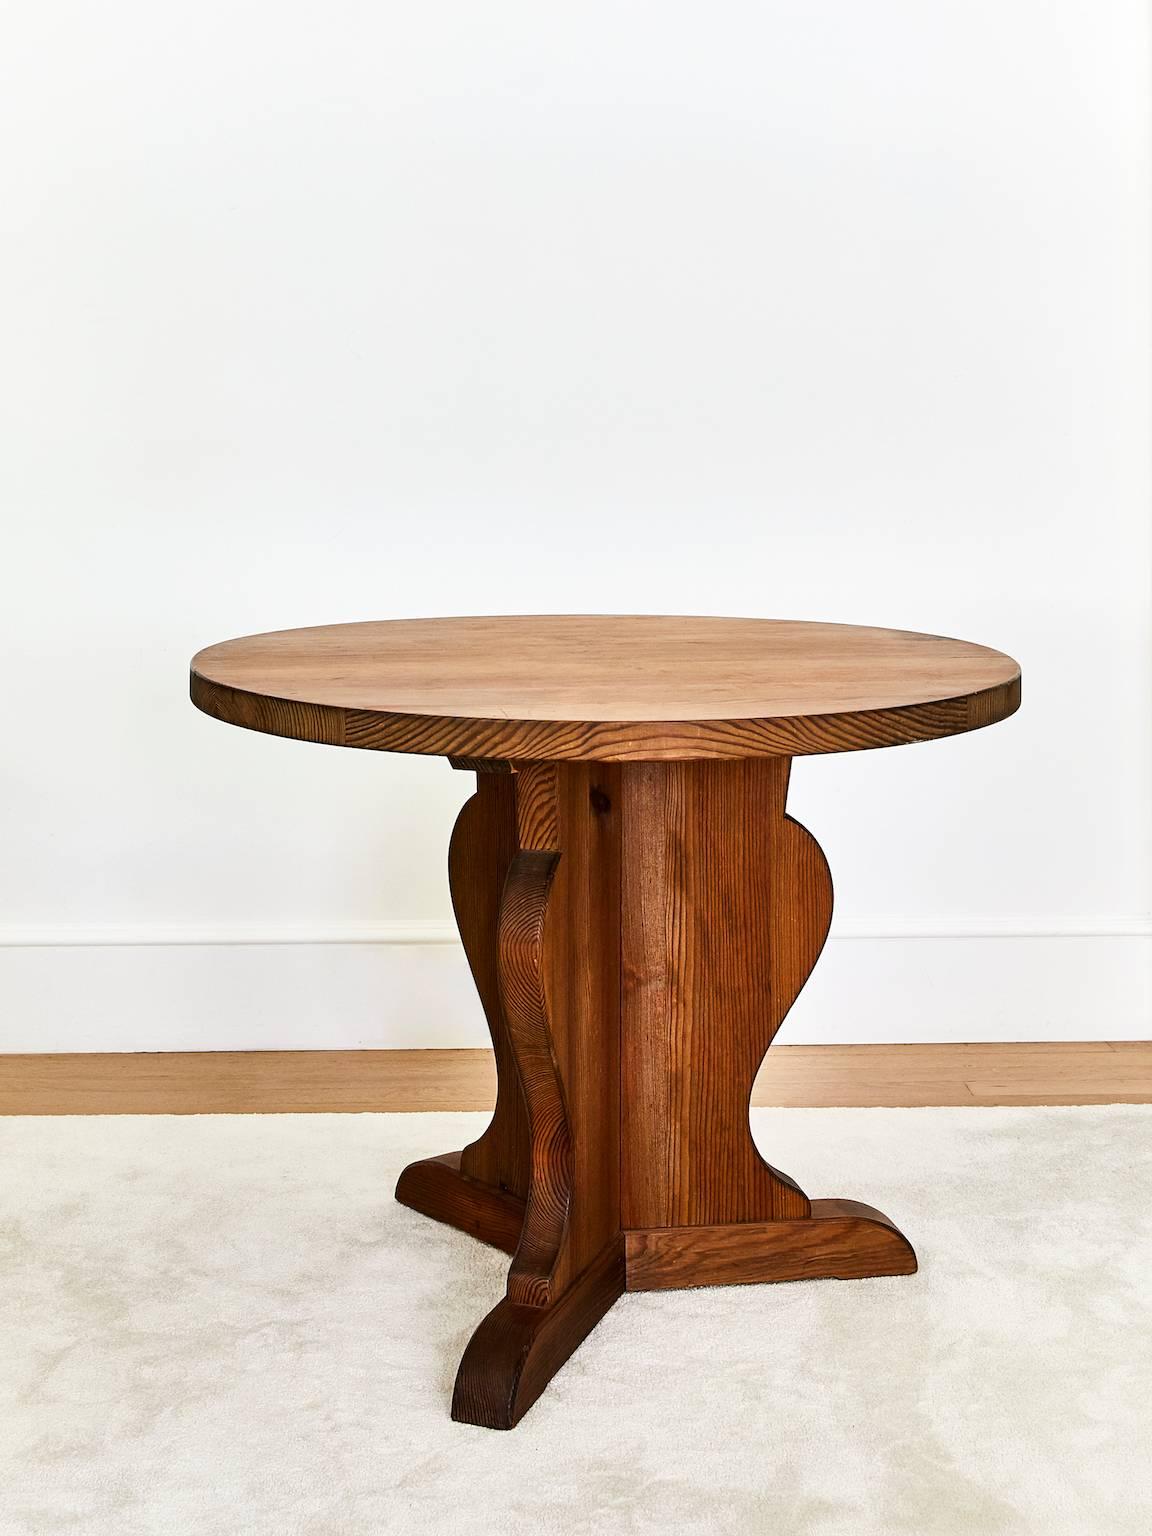 Solid pine table designed by Axel Einar Hjorth and produced for Stockholm department store Nordiska Kompaniet in the 1930s. 

He was the store's chief interior architect. The tables are quite rare and ended up being produced in a small quantity as